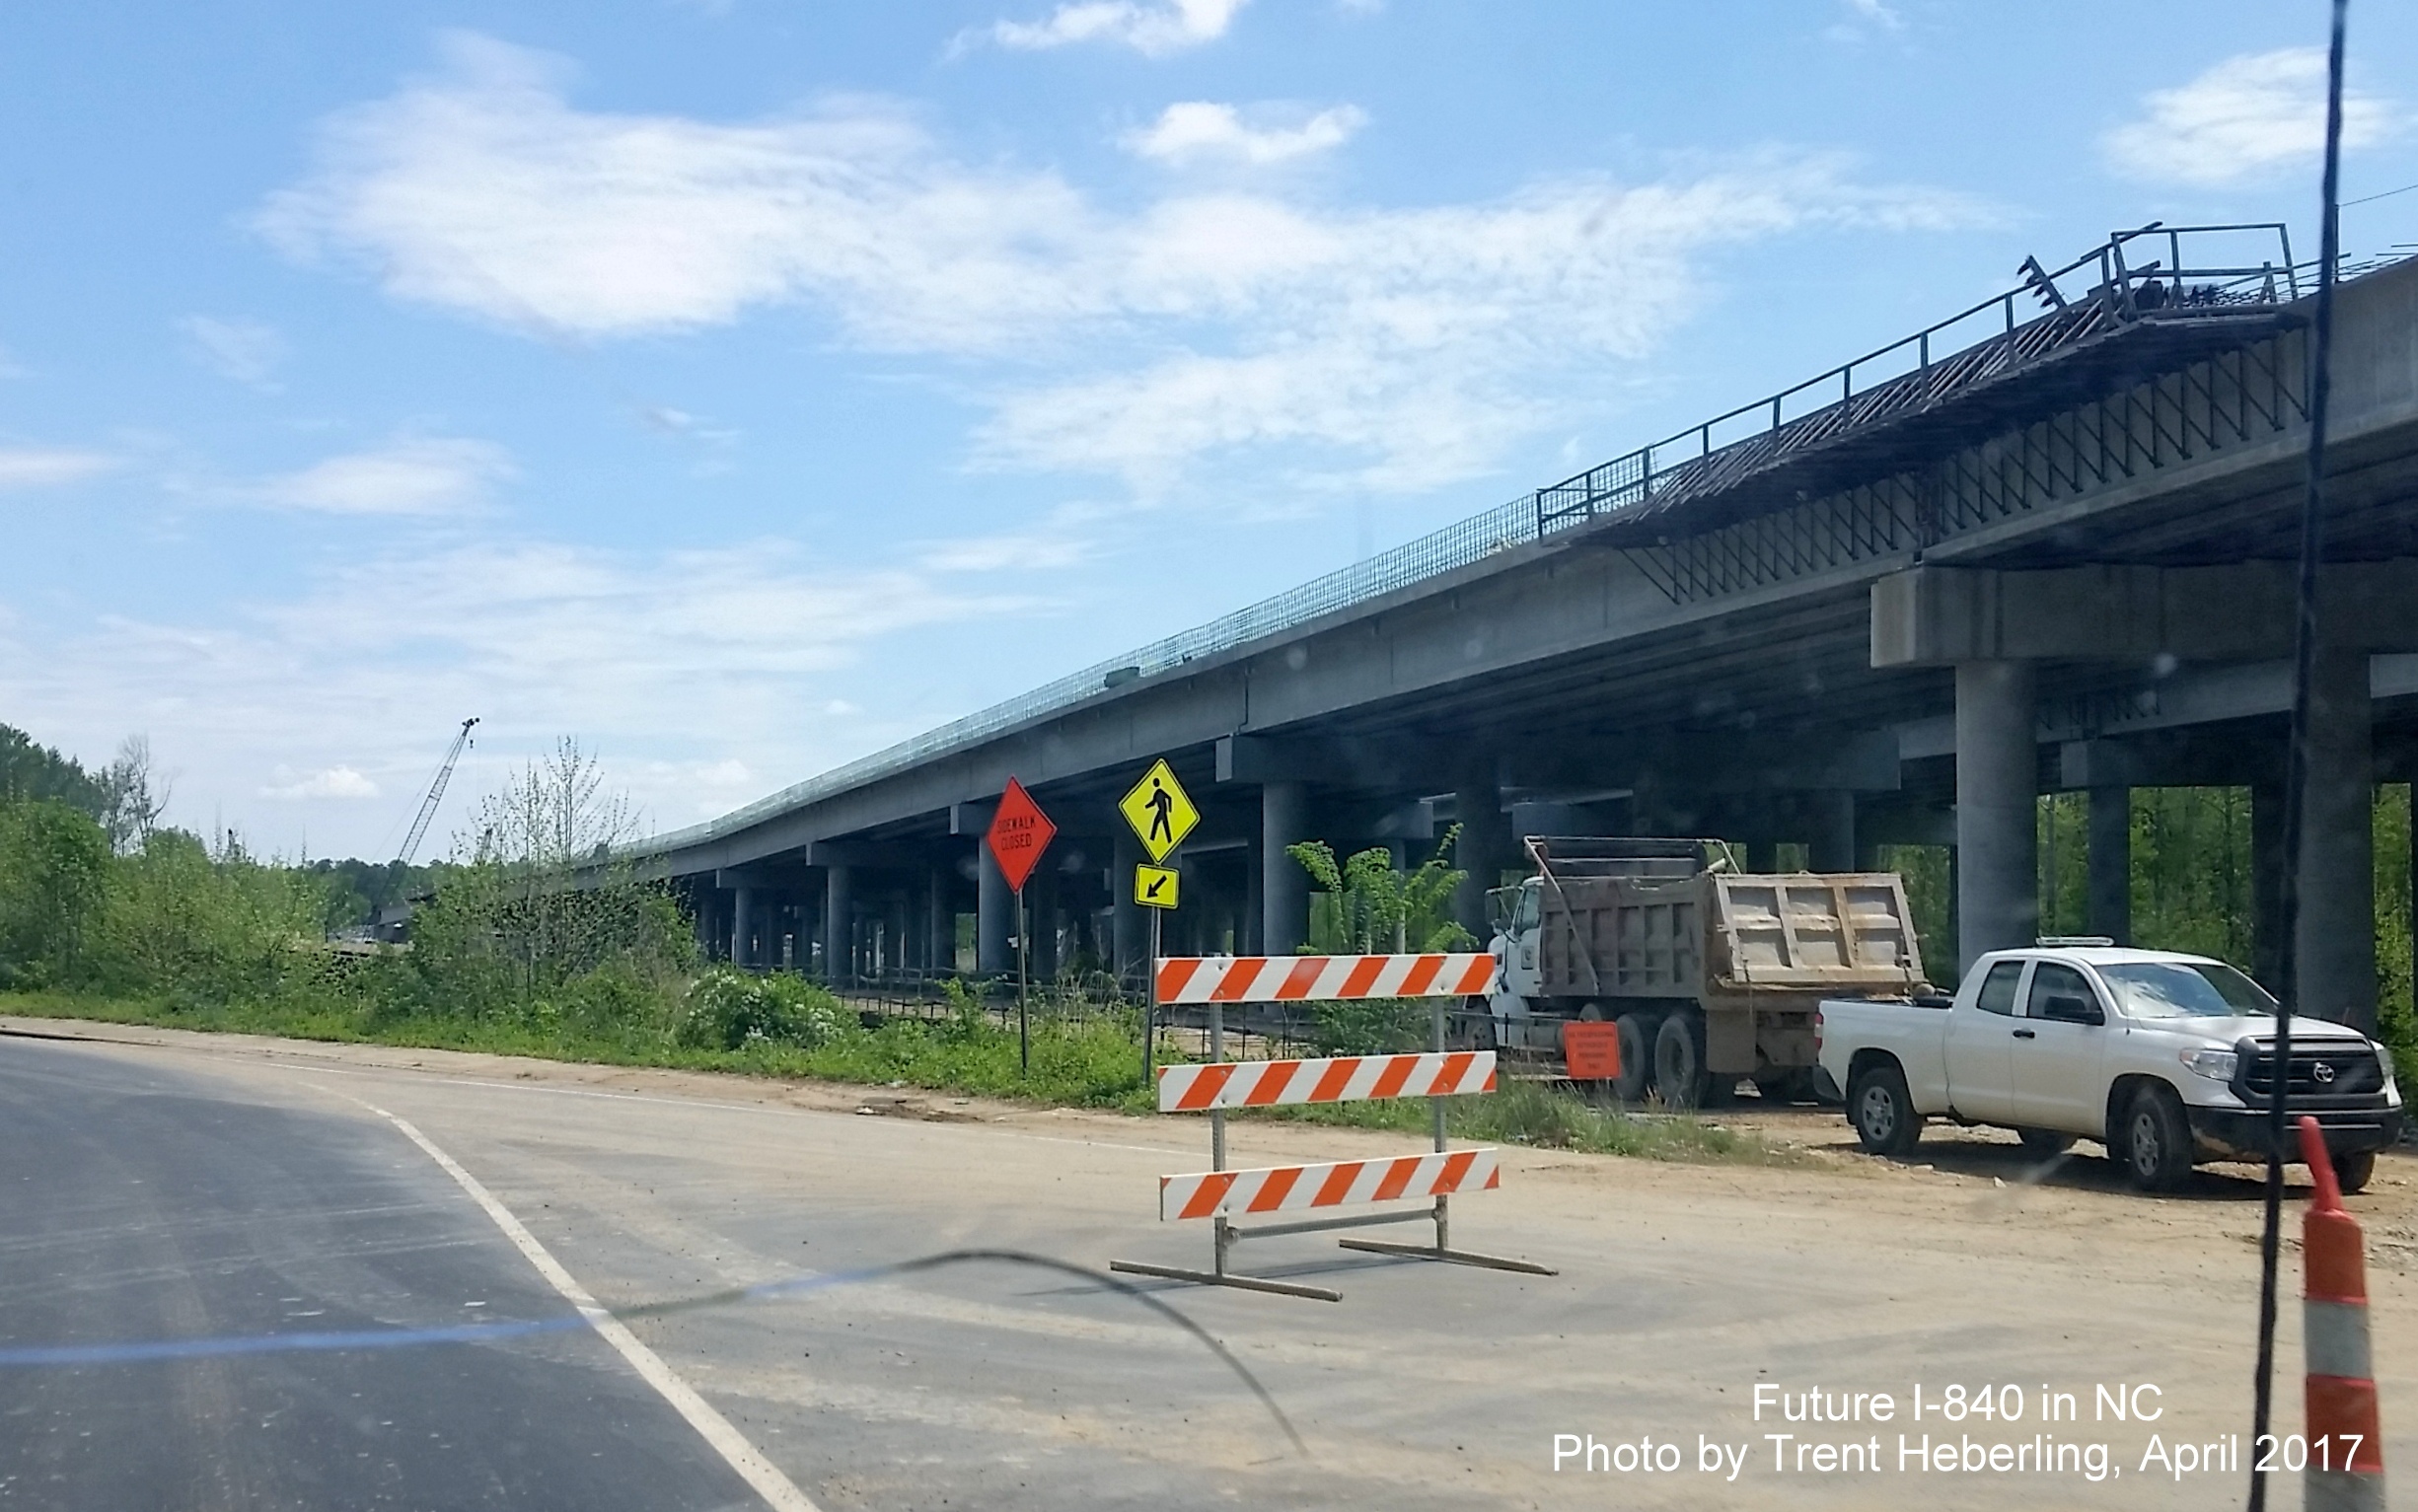 Image of view along Drawbridge Pkwy of Future I-840 elevated freeway under construction in Greensboro, from Trent Heberling